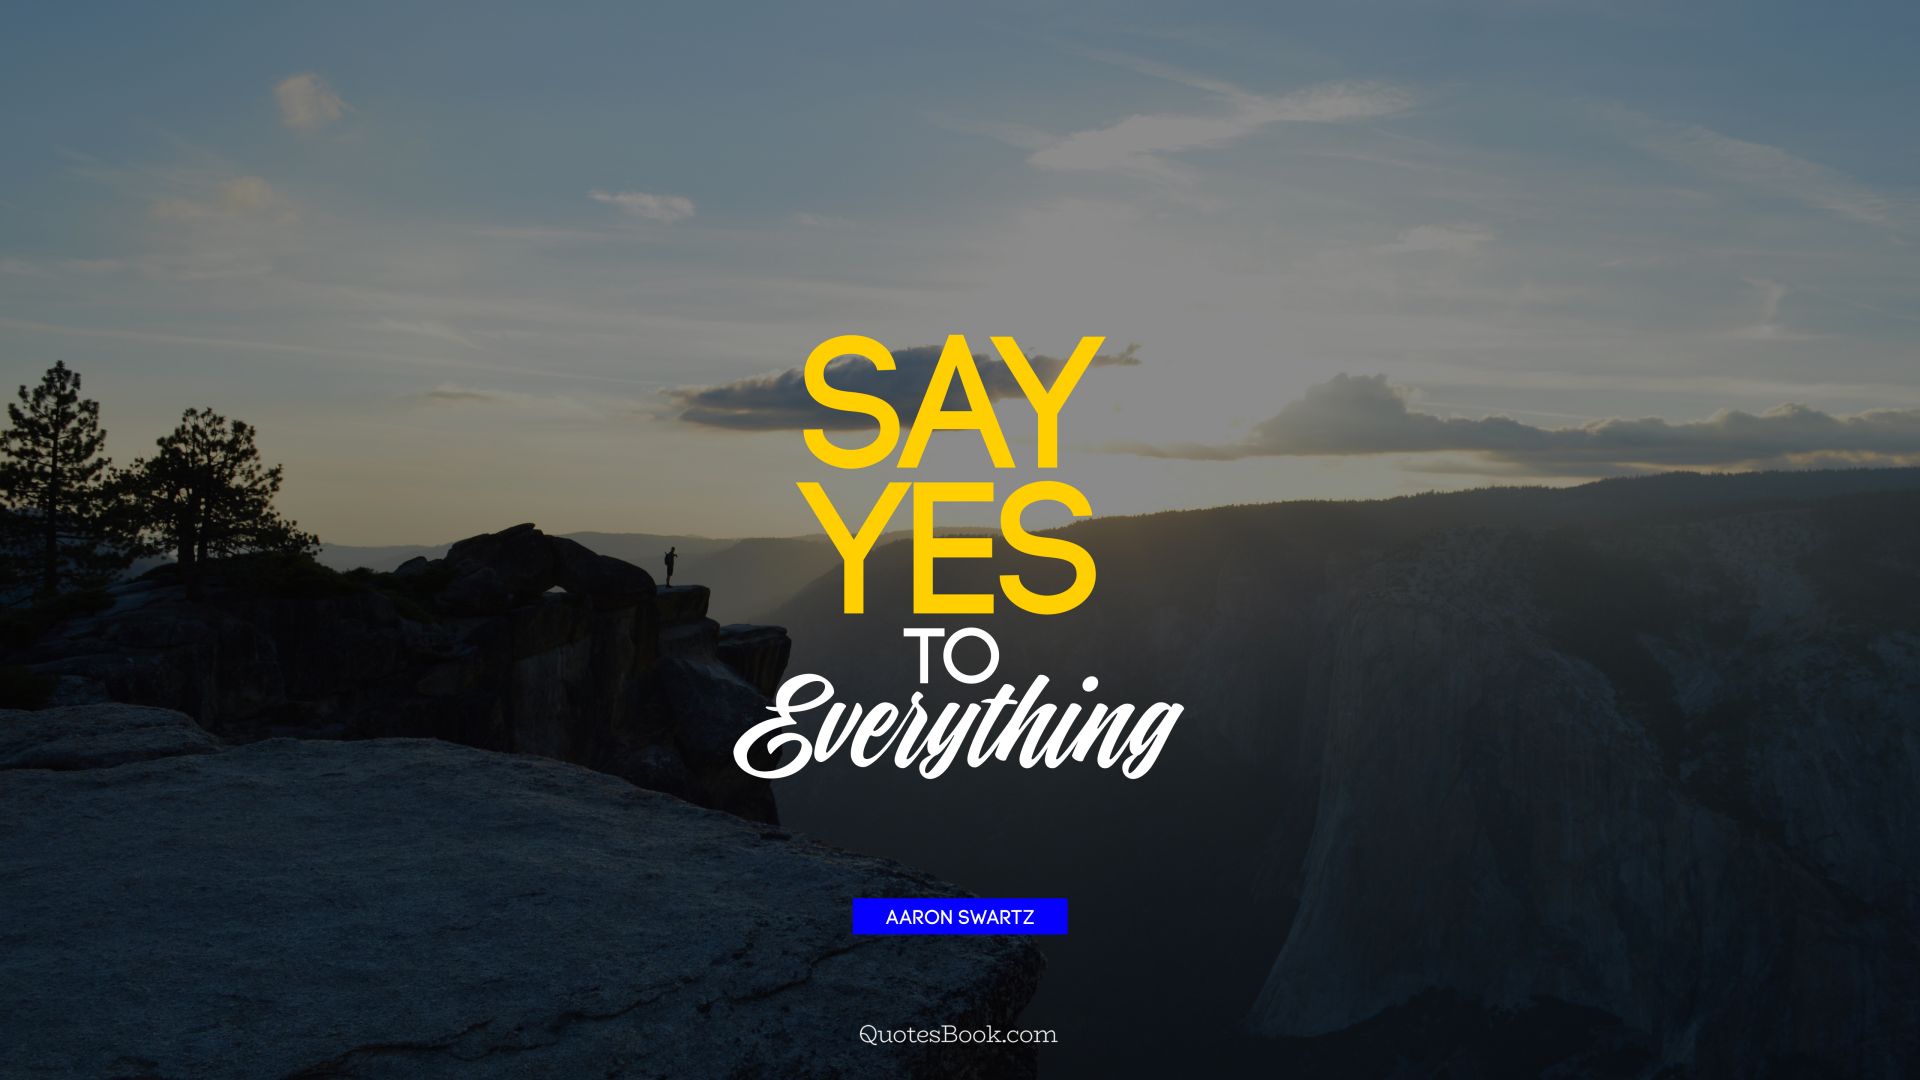 Say yes to everything. - Quote by Aaron Swartz